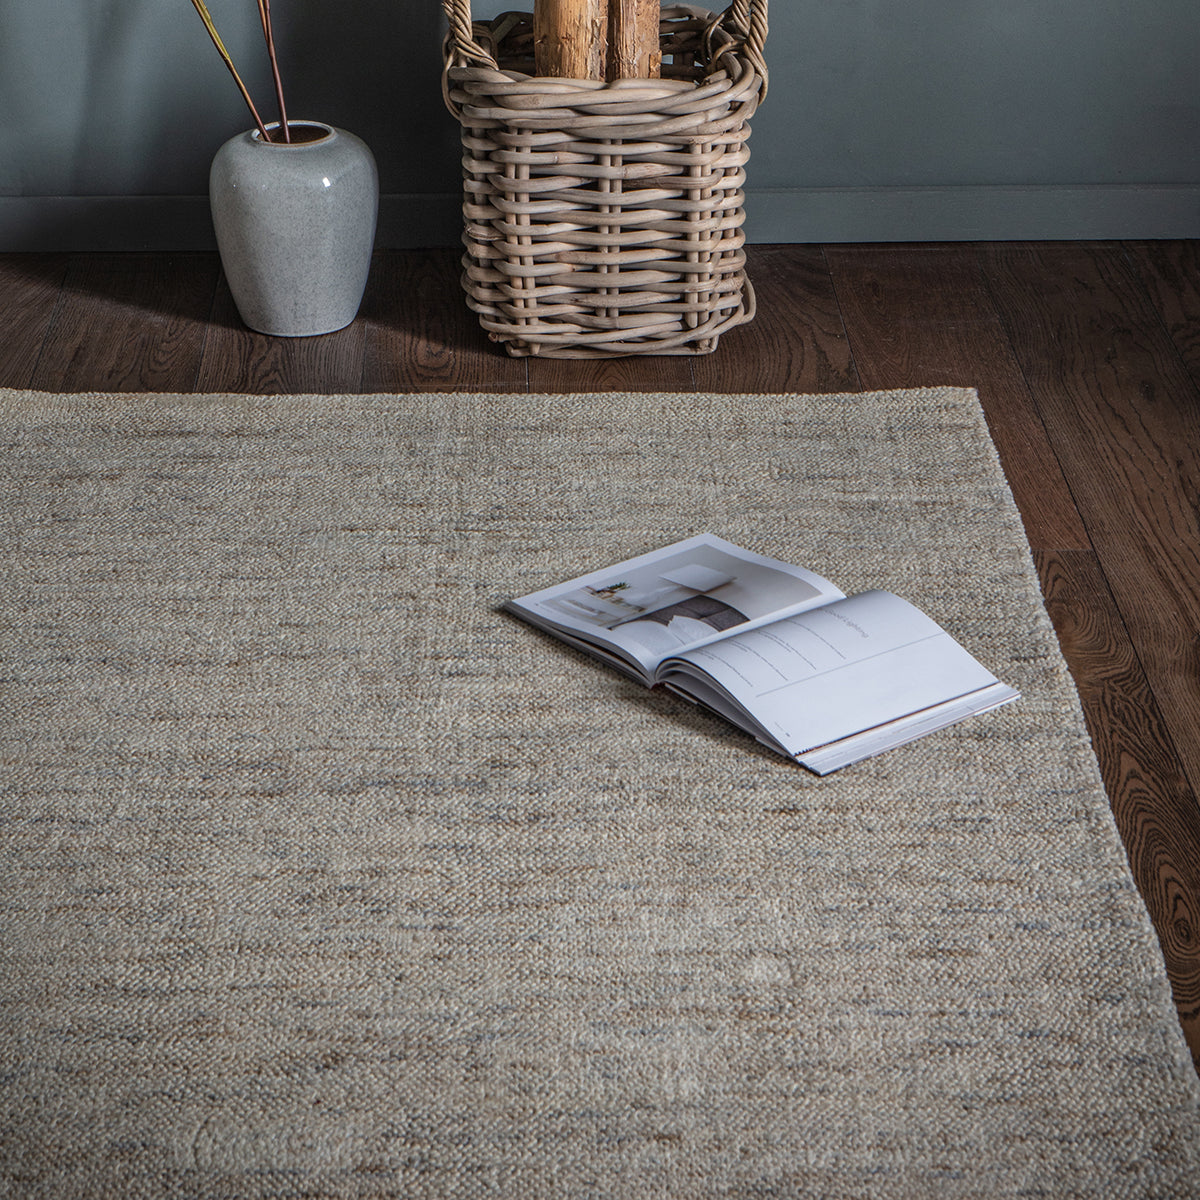 A Ford Rug from Kikiathome.co.uk enhances interior decor with its Champagne color and is placed on a wooden floor alongside a book.